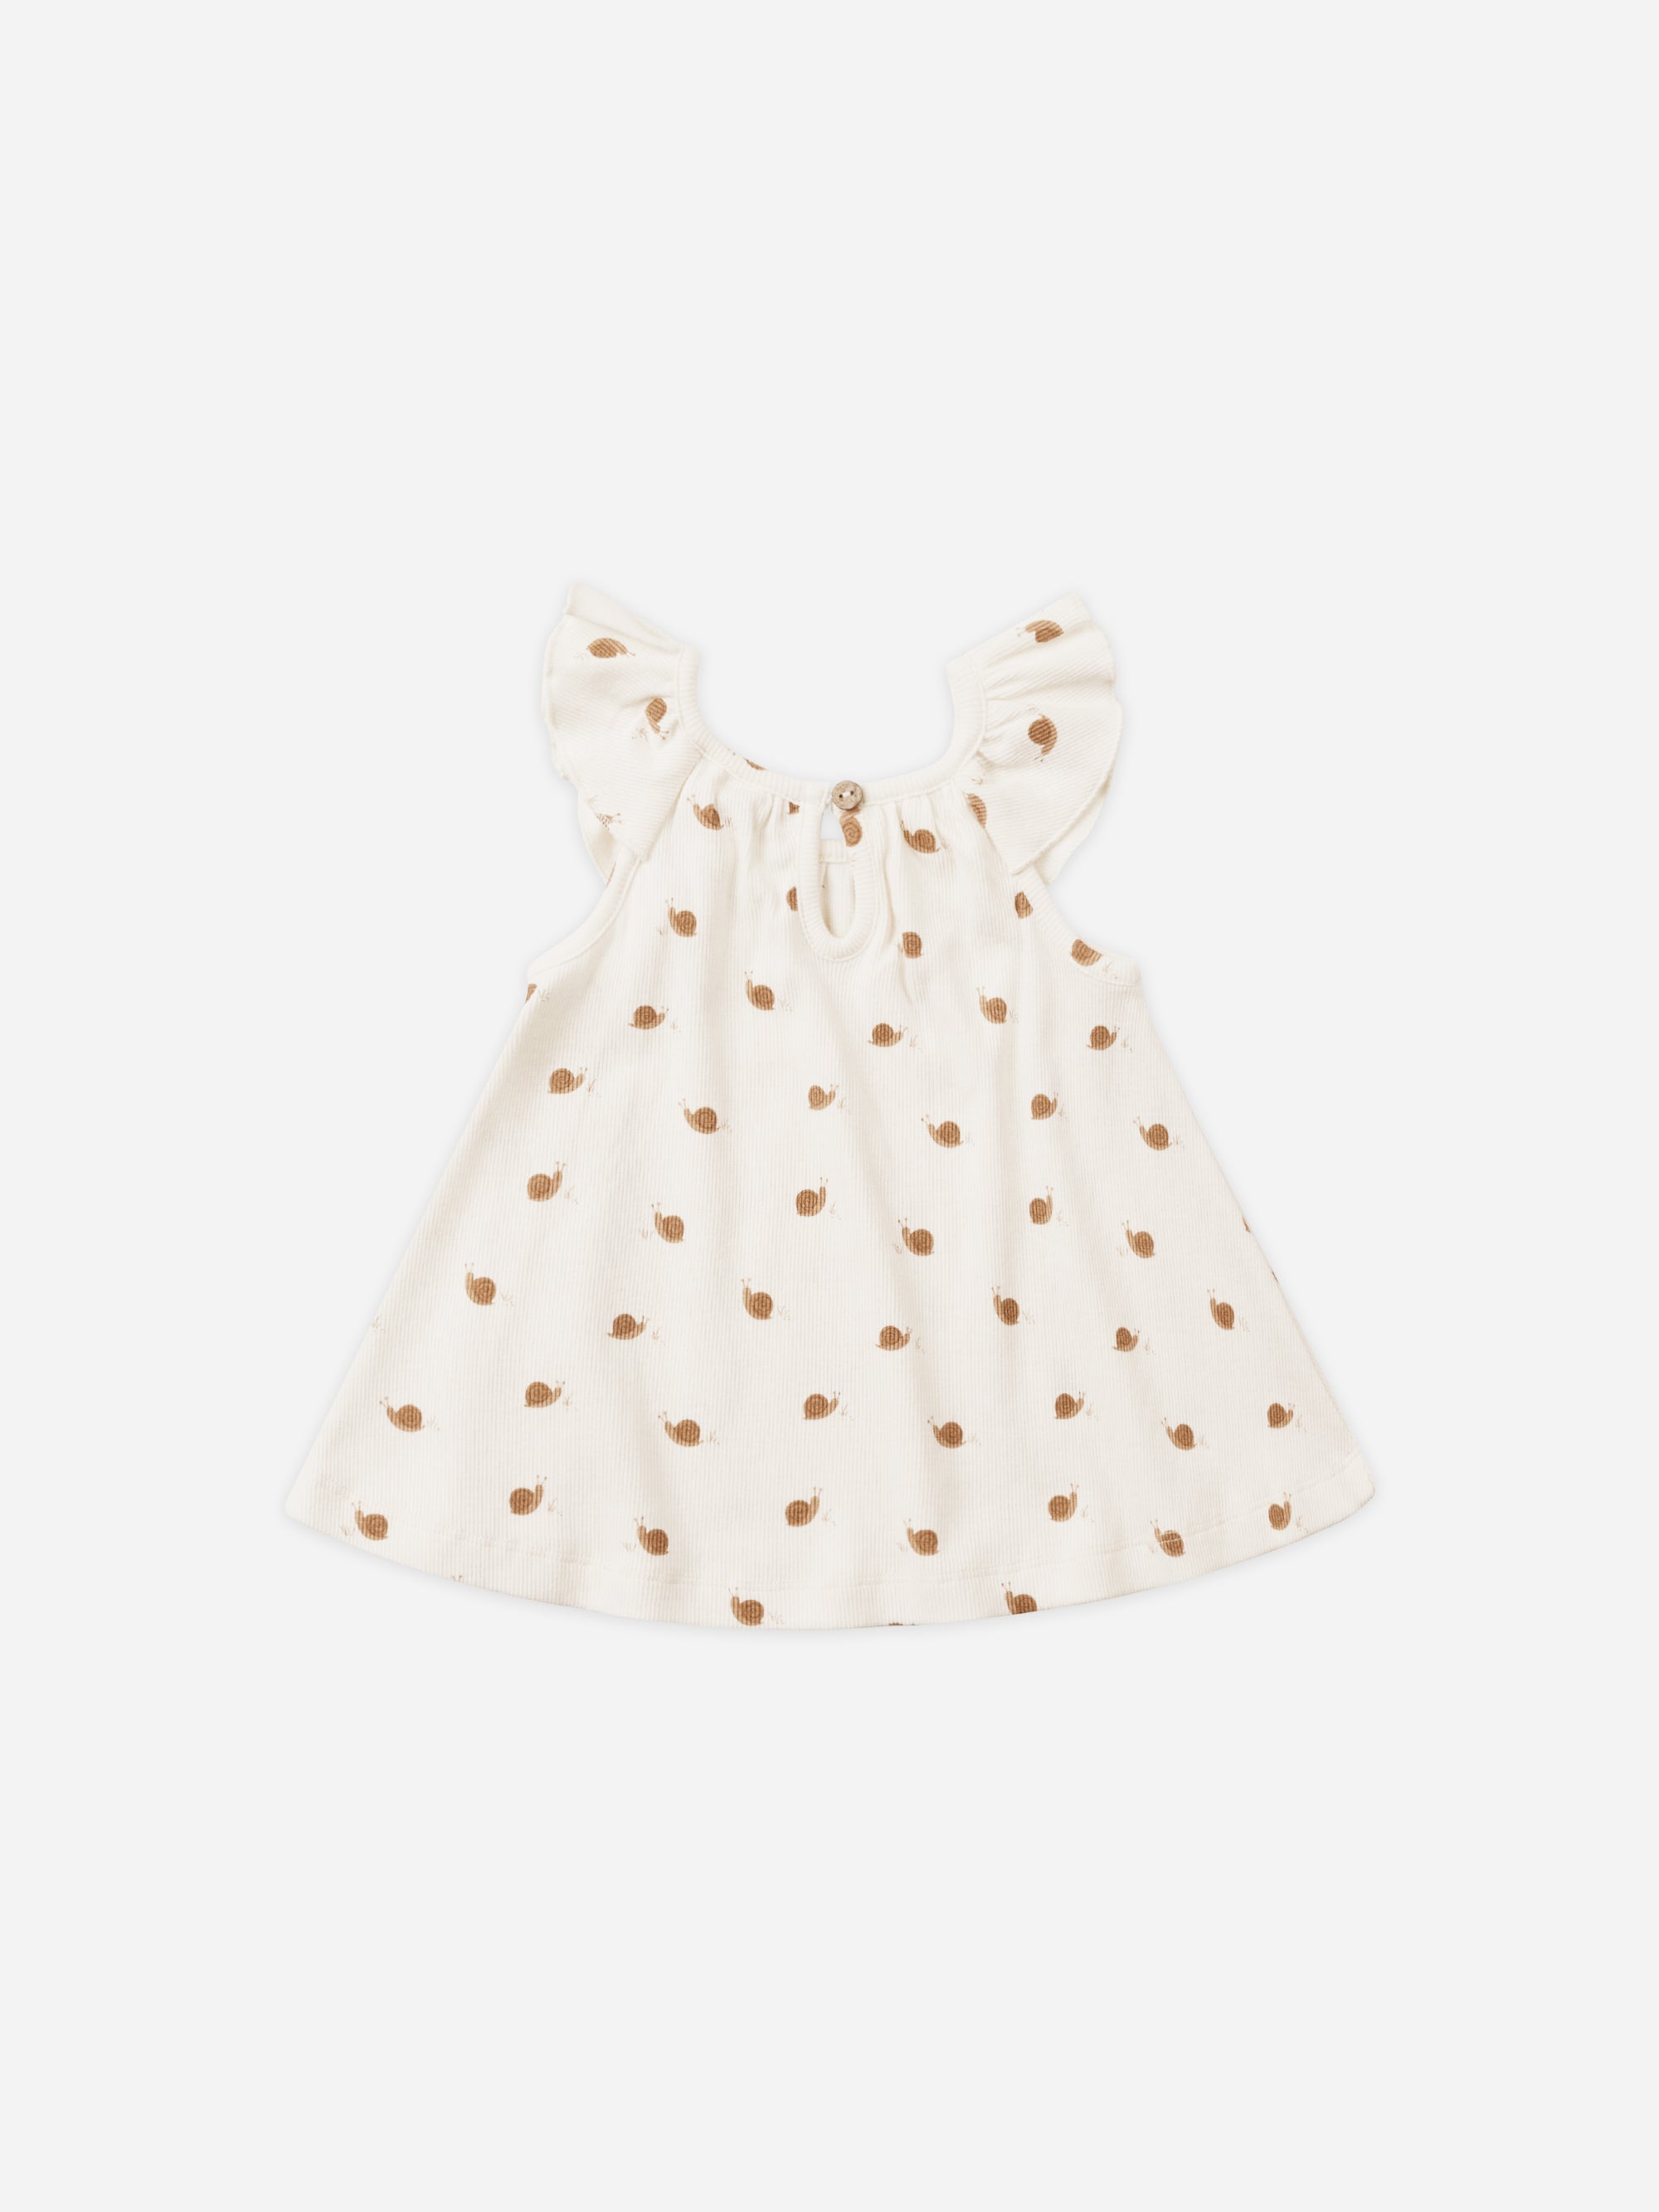 Ruffle Swing Dress || Snails - Rylee + Cru | Kids Clothes | Trendy Baby Clothes | Modern Infant Outfits |